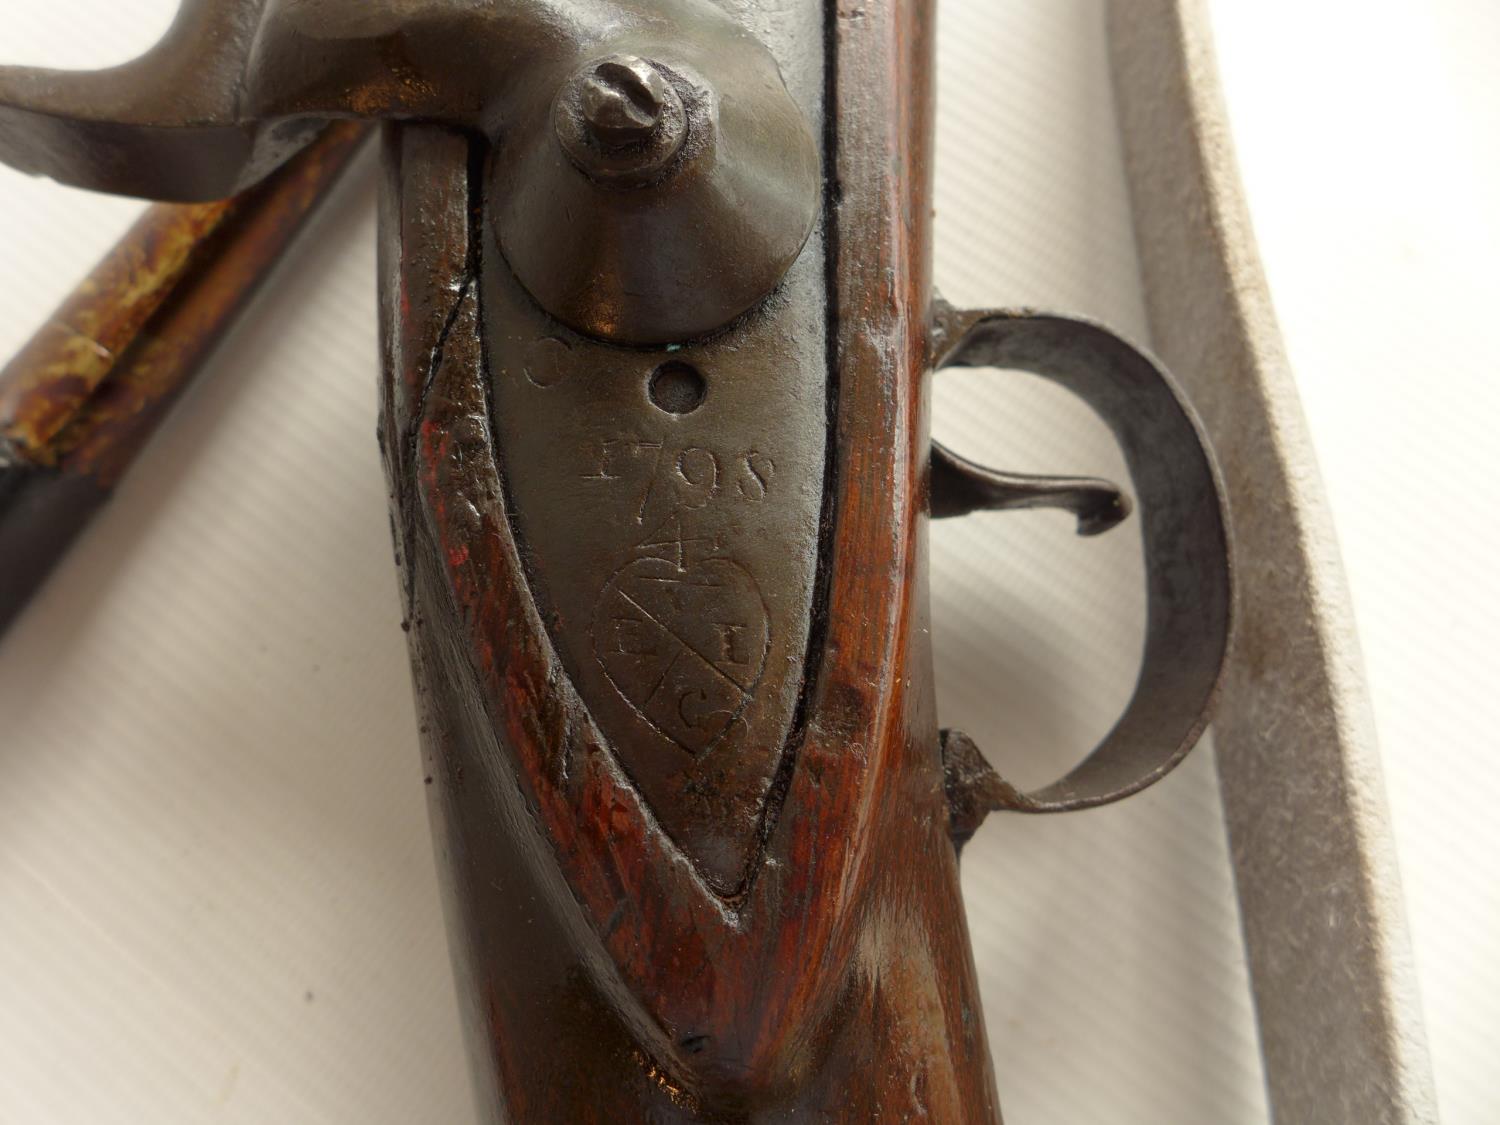 AN EAST INDIA COMPANY PERCUSSION CAP BROWN BESS MUSKET AND BAYONET, LOCK MARKED HURST, LENGTH OF - Image 7 of 11